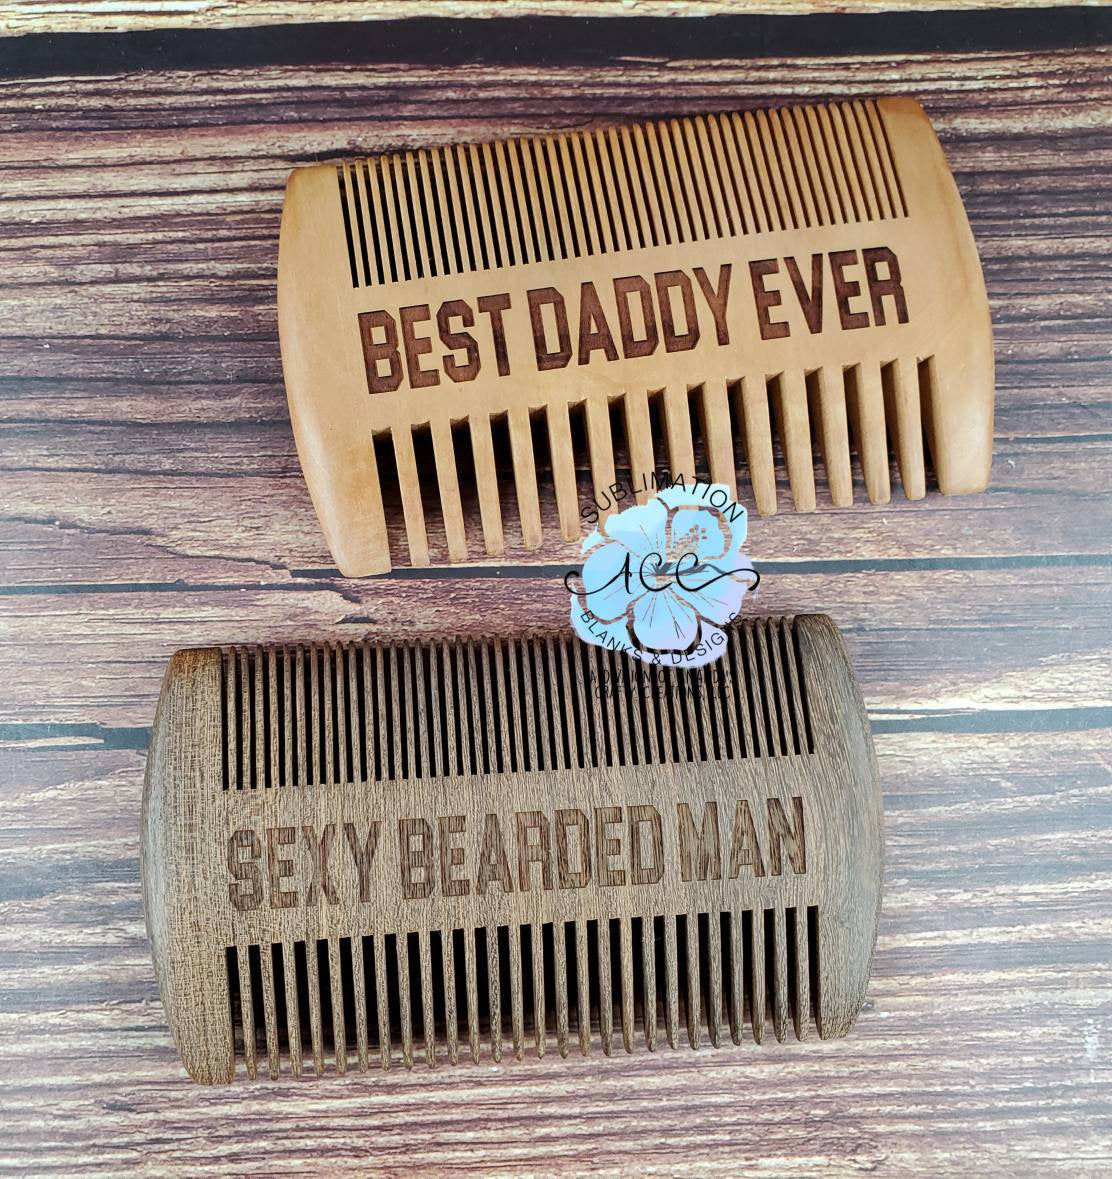 Best daddy ever and sexy bearded man customizable wooden beard combs